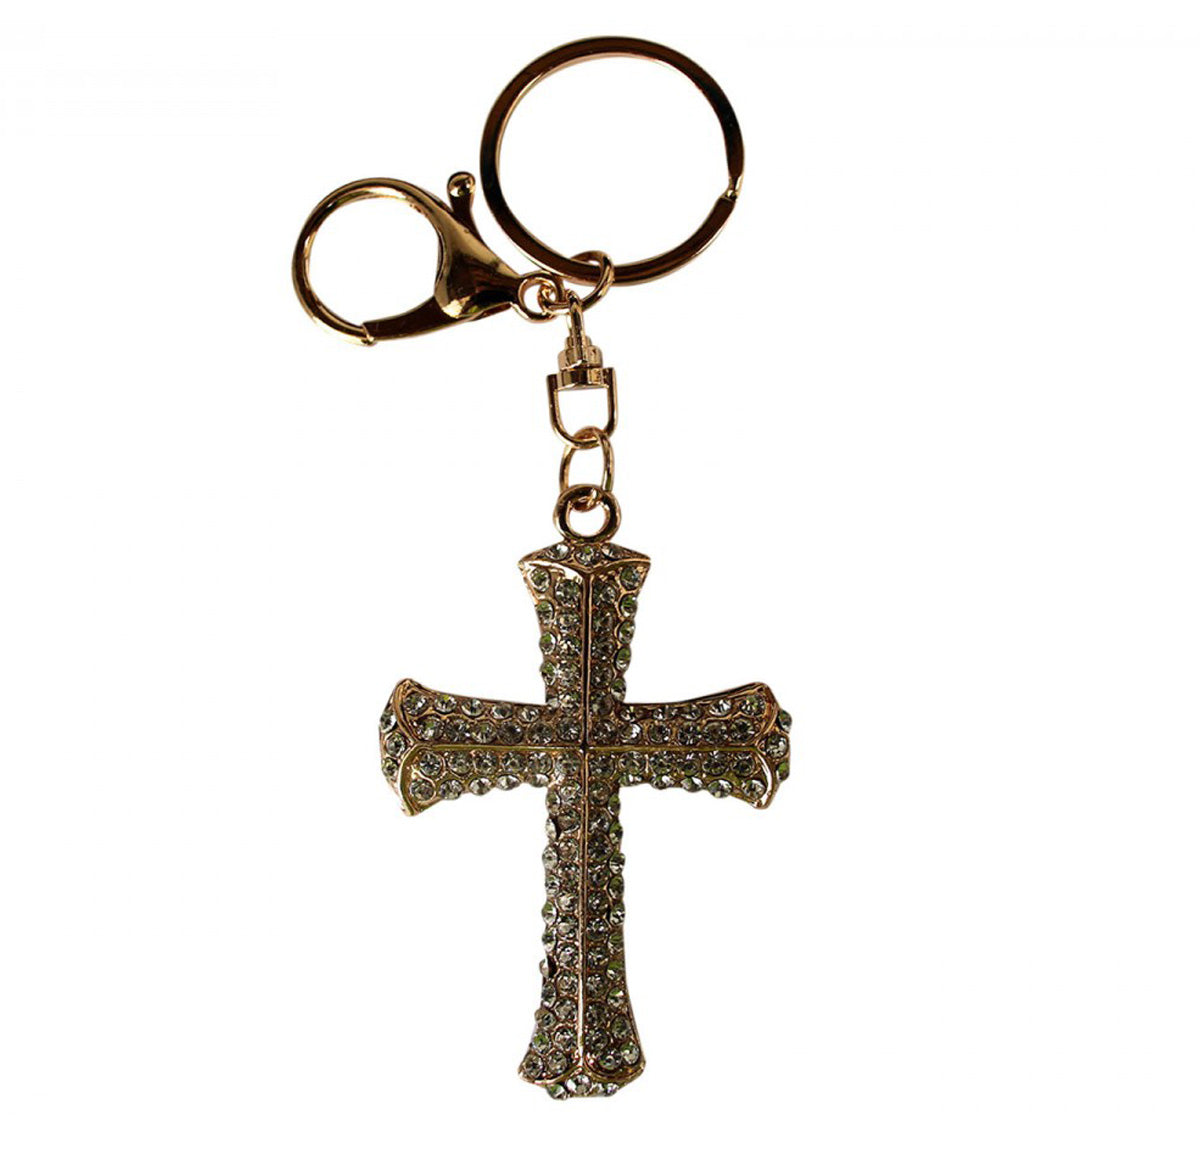 Bling Cross Keyring | Accessories | Home Decor